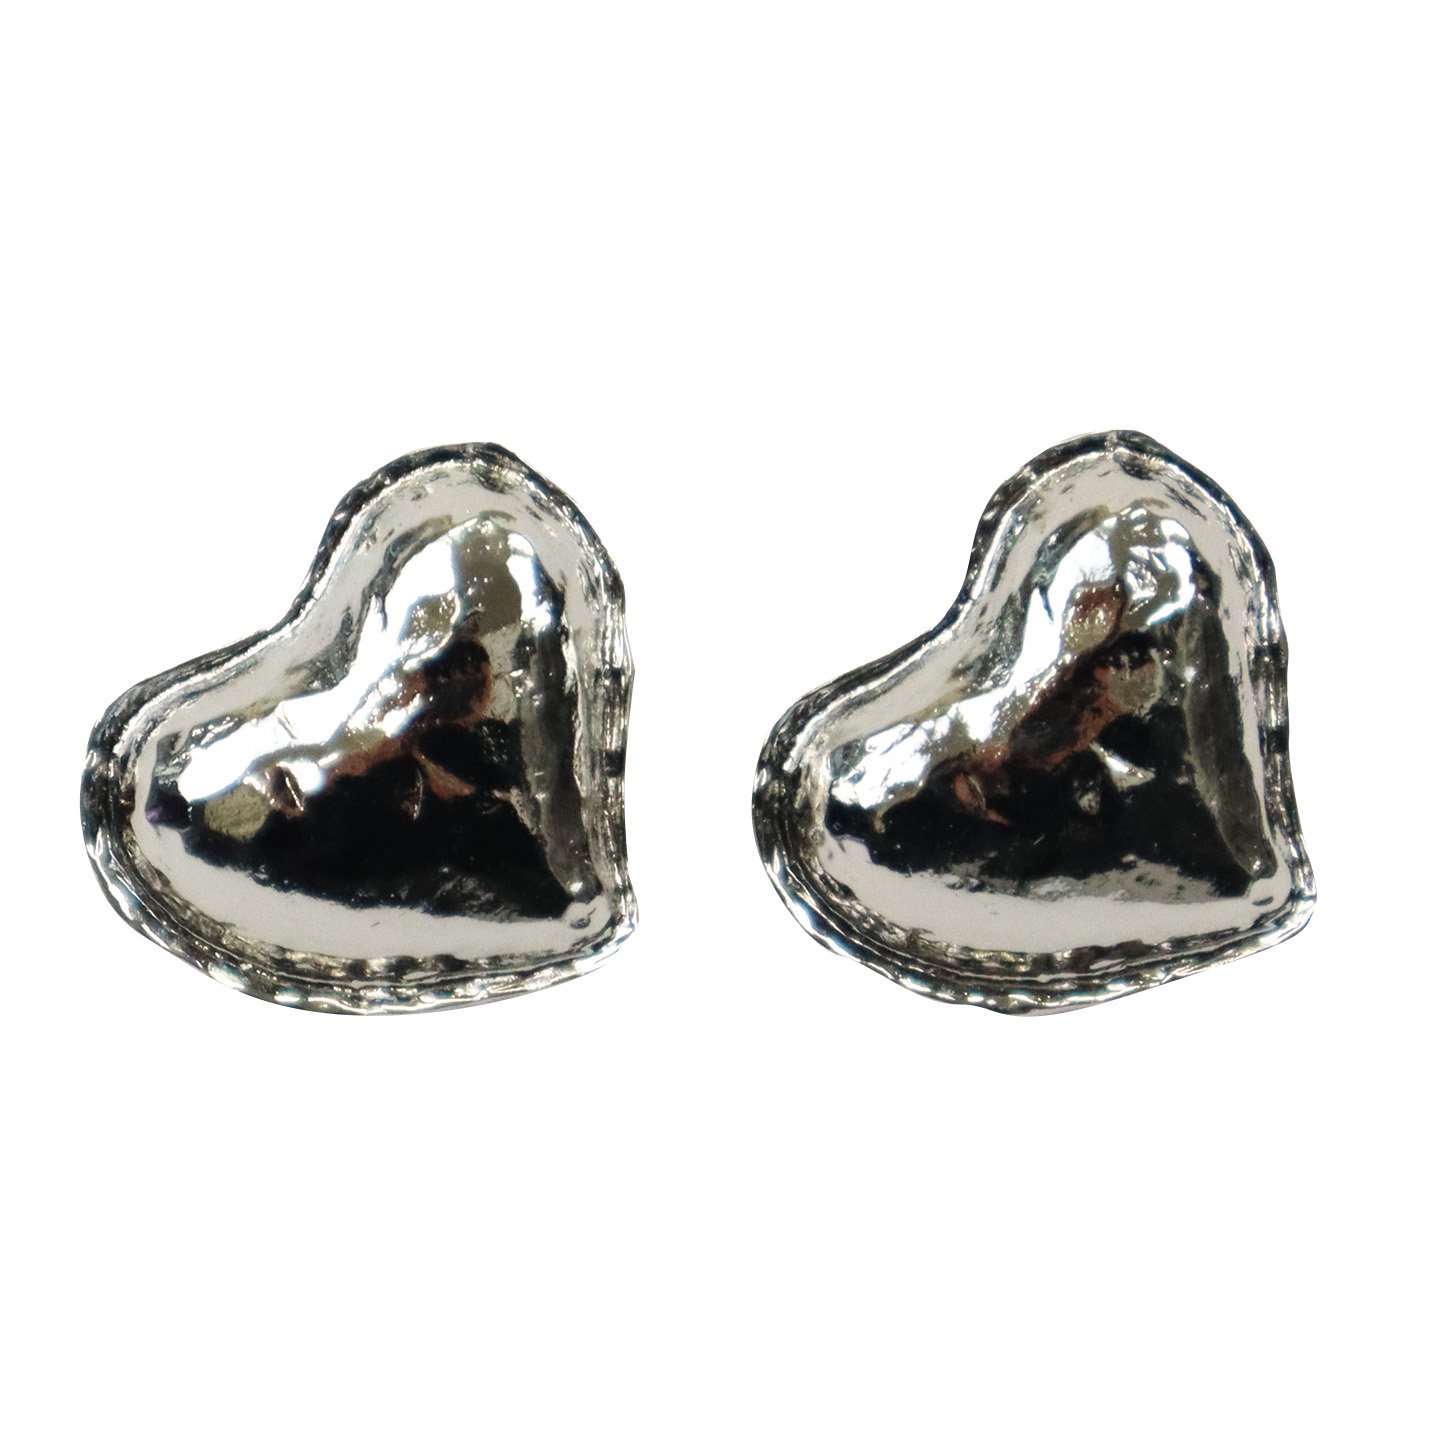 <img class='new_mark_img1' src='https://img.shop-pro.jp/img/new/icons6.gif' style='border:none;display:inline;margin:0px;padding:0px;width:auto;' />SEA'DS MARA Heart motif earring【SILVER】